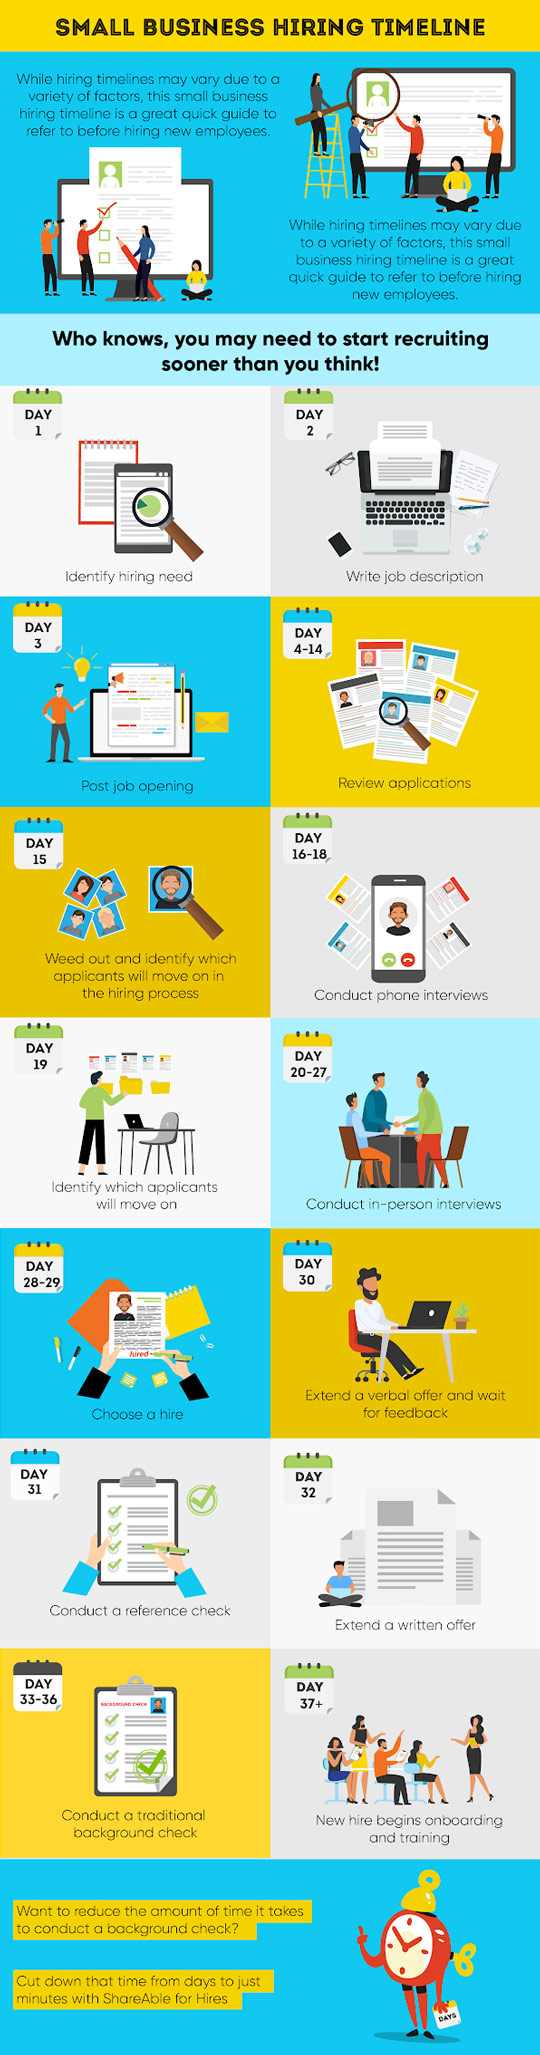 Small Business Hiring Timeline Infographic